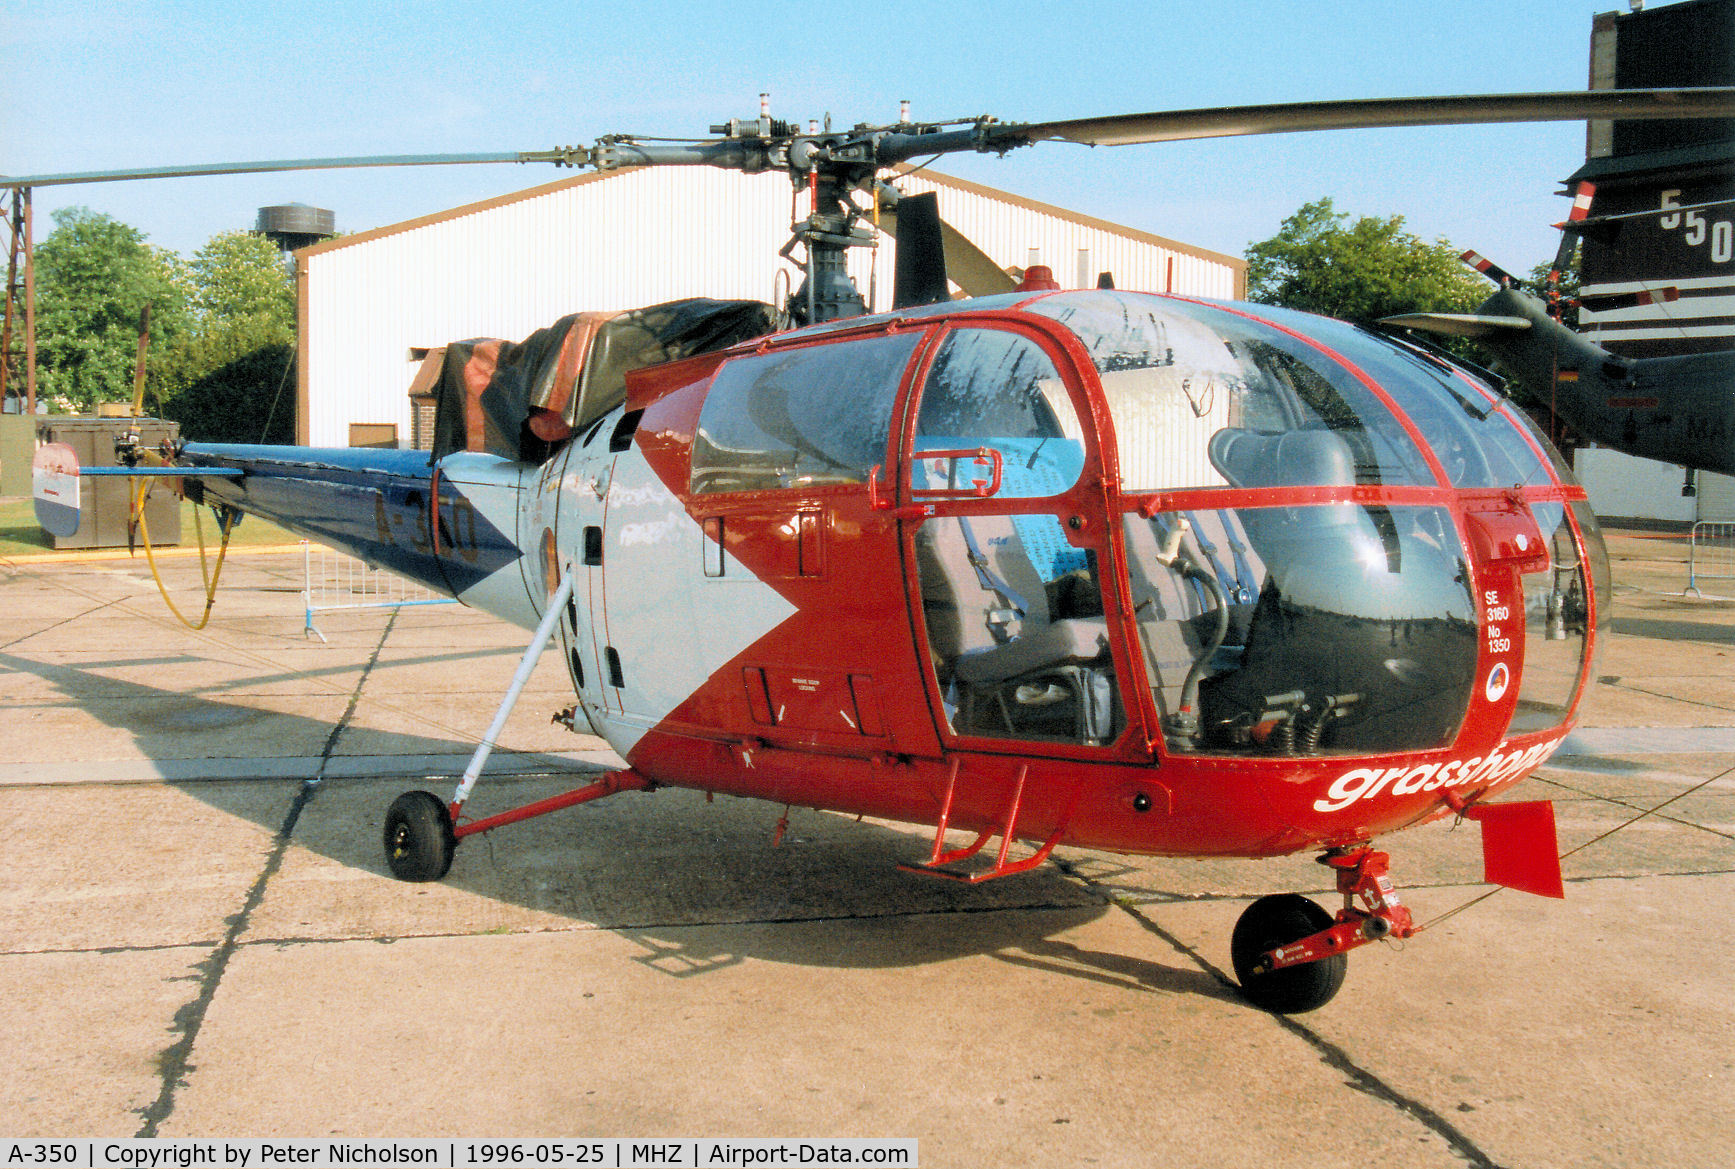 A-350, Sud SE-3160 Alouette III C/N 1350, Alouette III of 302 Squadron's Grasshopper aerial display team of the Royal Netherlands Air Force on display at the 1996 RAF Mildenhall Air Fete.